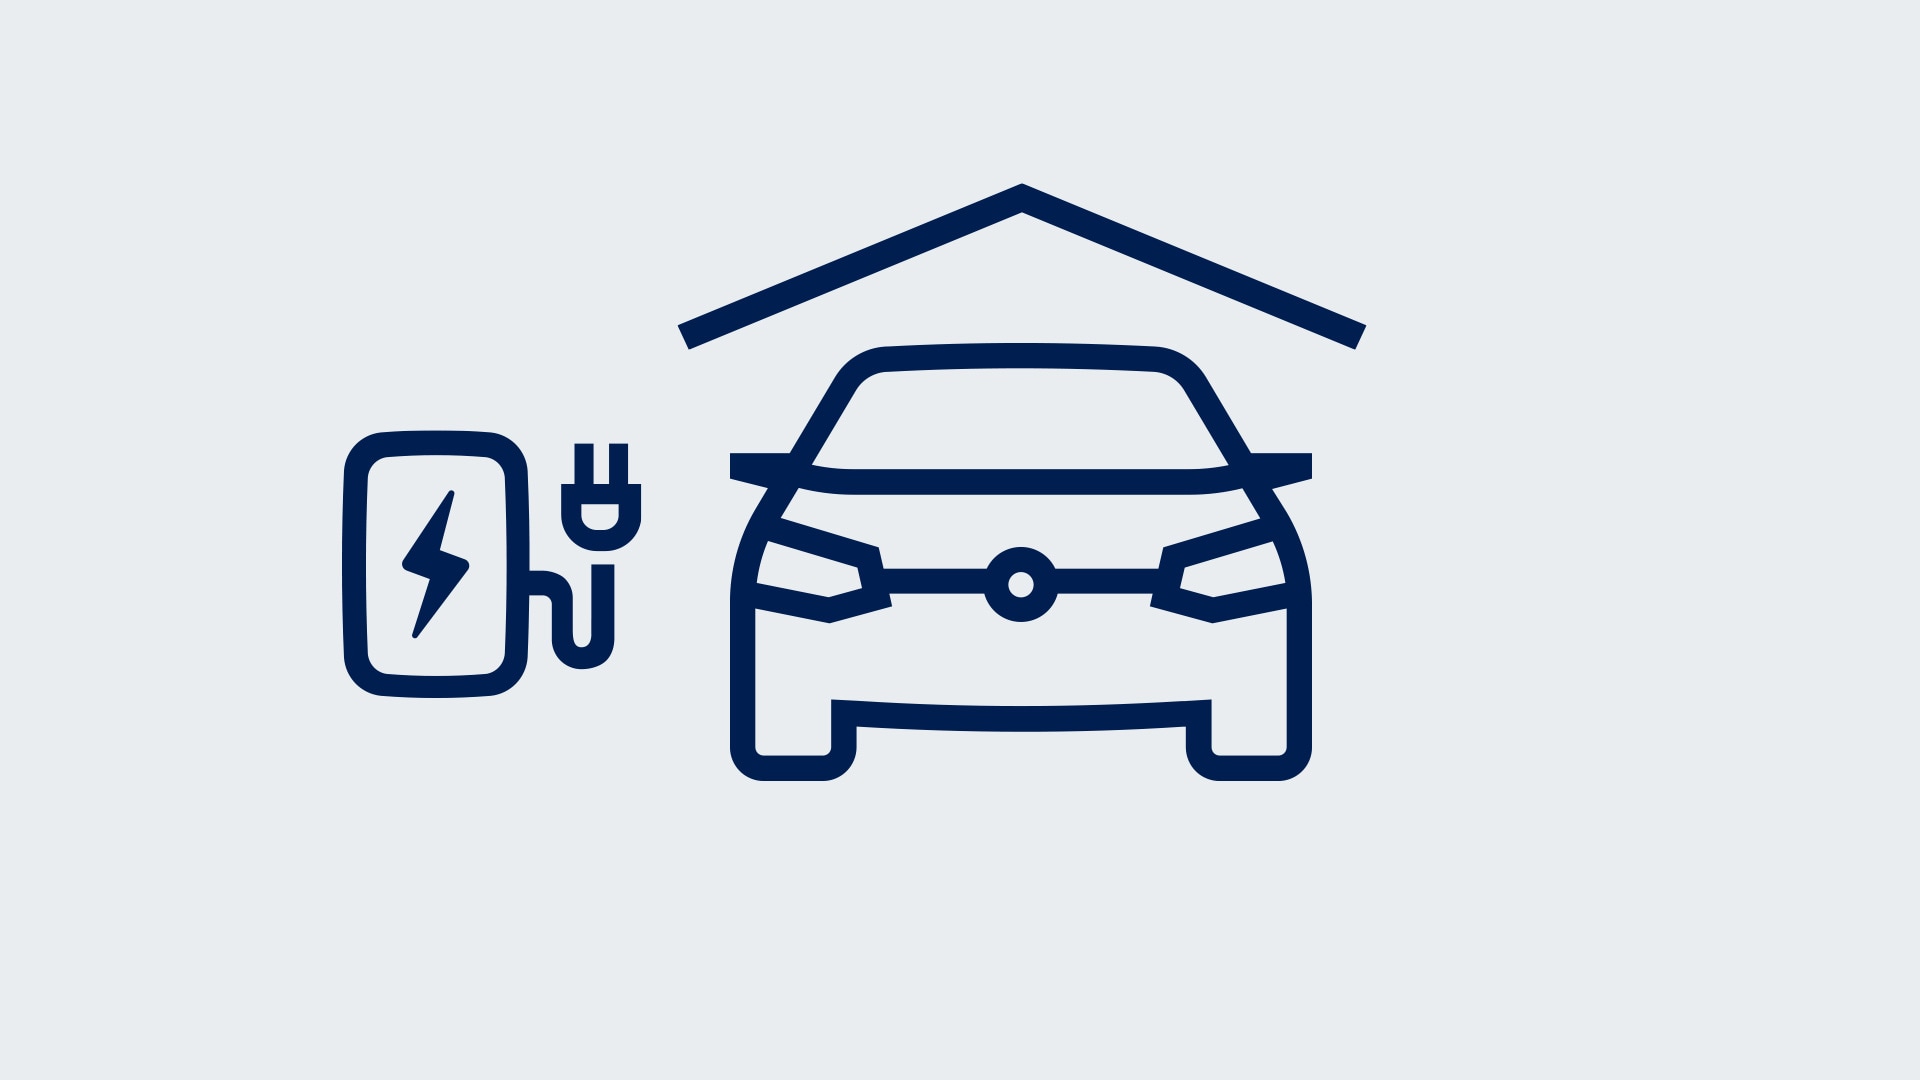  An image that shows an icon of a car under a roof next to an icon of an at home charging station.